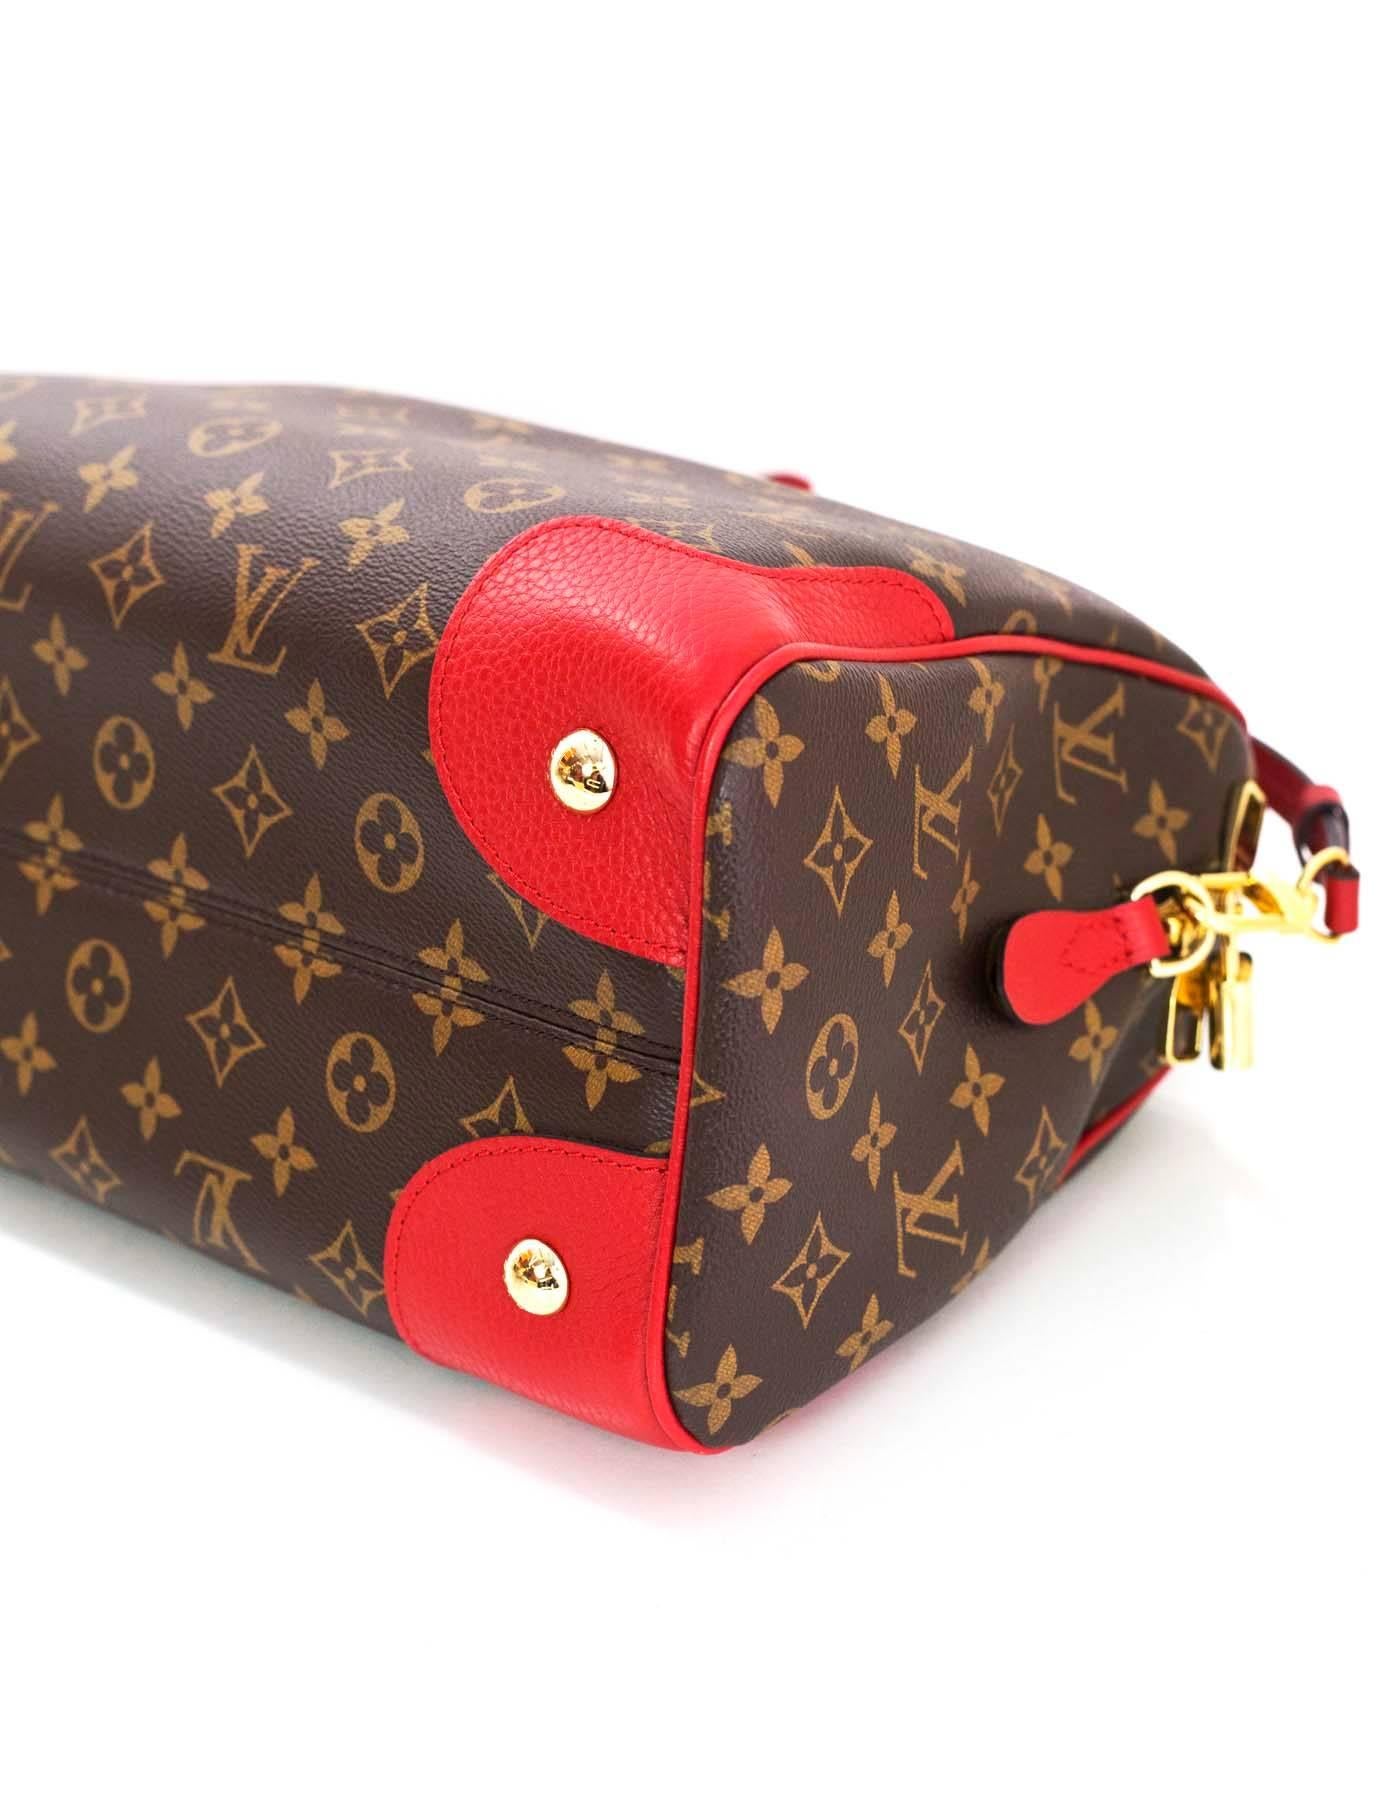 Louis Vuitton Monogram & Cerise Red Leather Retiro Bag w/ Strap In Excellent Condition In New York, NY